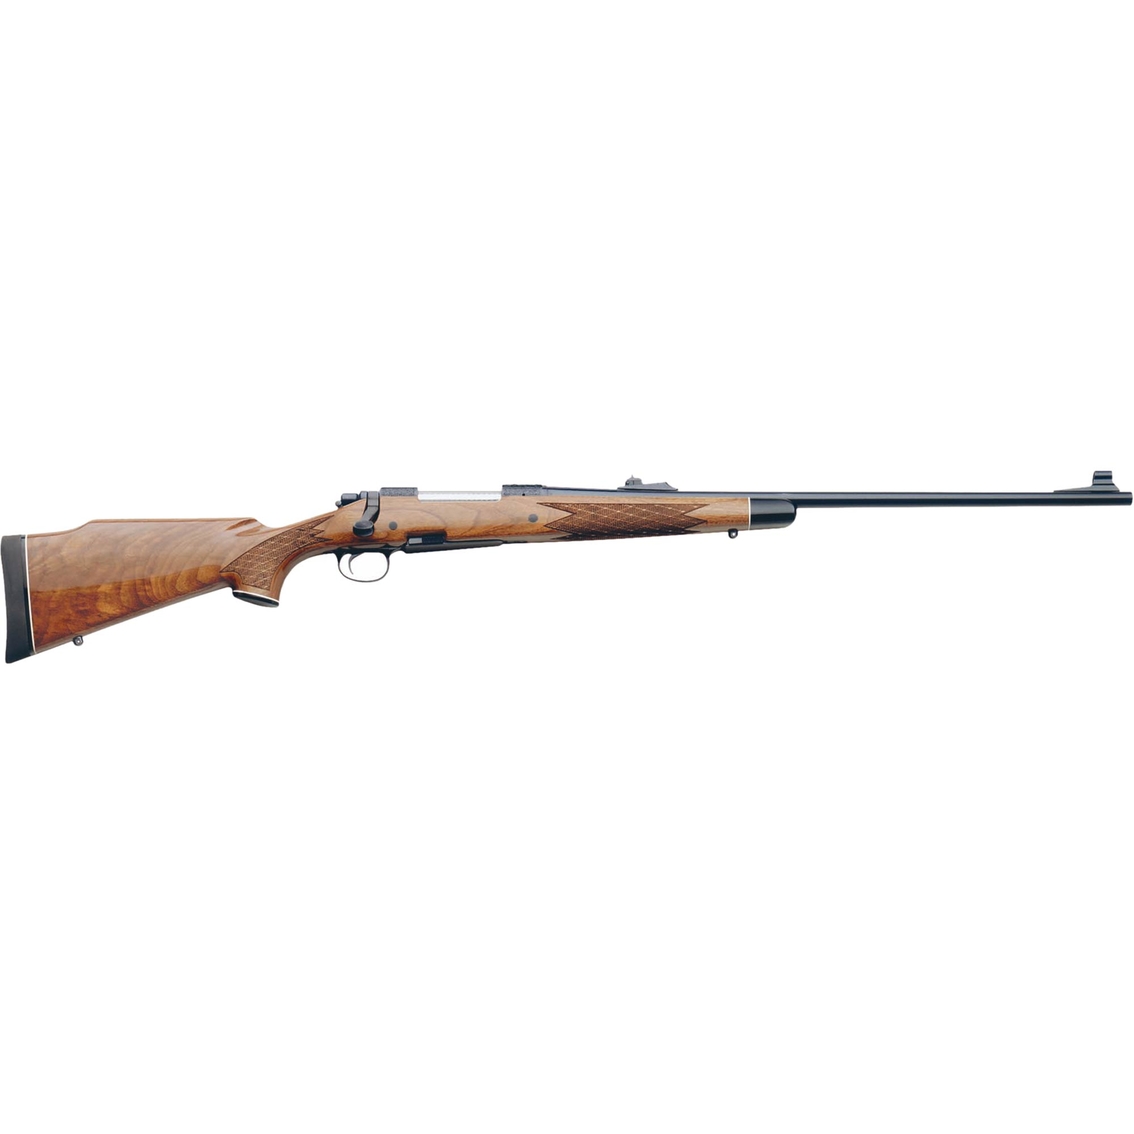 Remington 700 l 30 06 Springfield 22 In Barrel 4 Rnd Rifle Blued Rifles Sports Outdoors Shop The Exchange